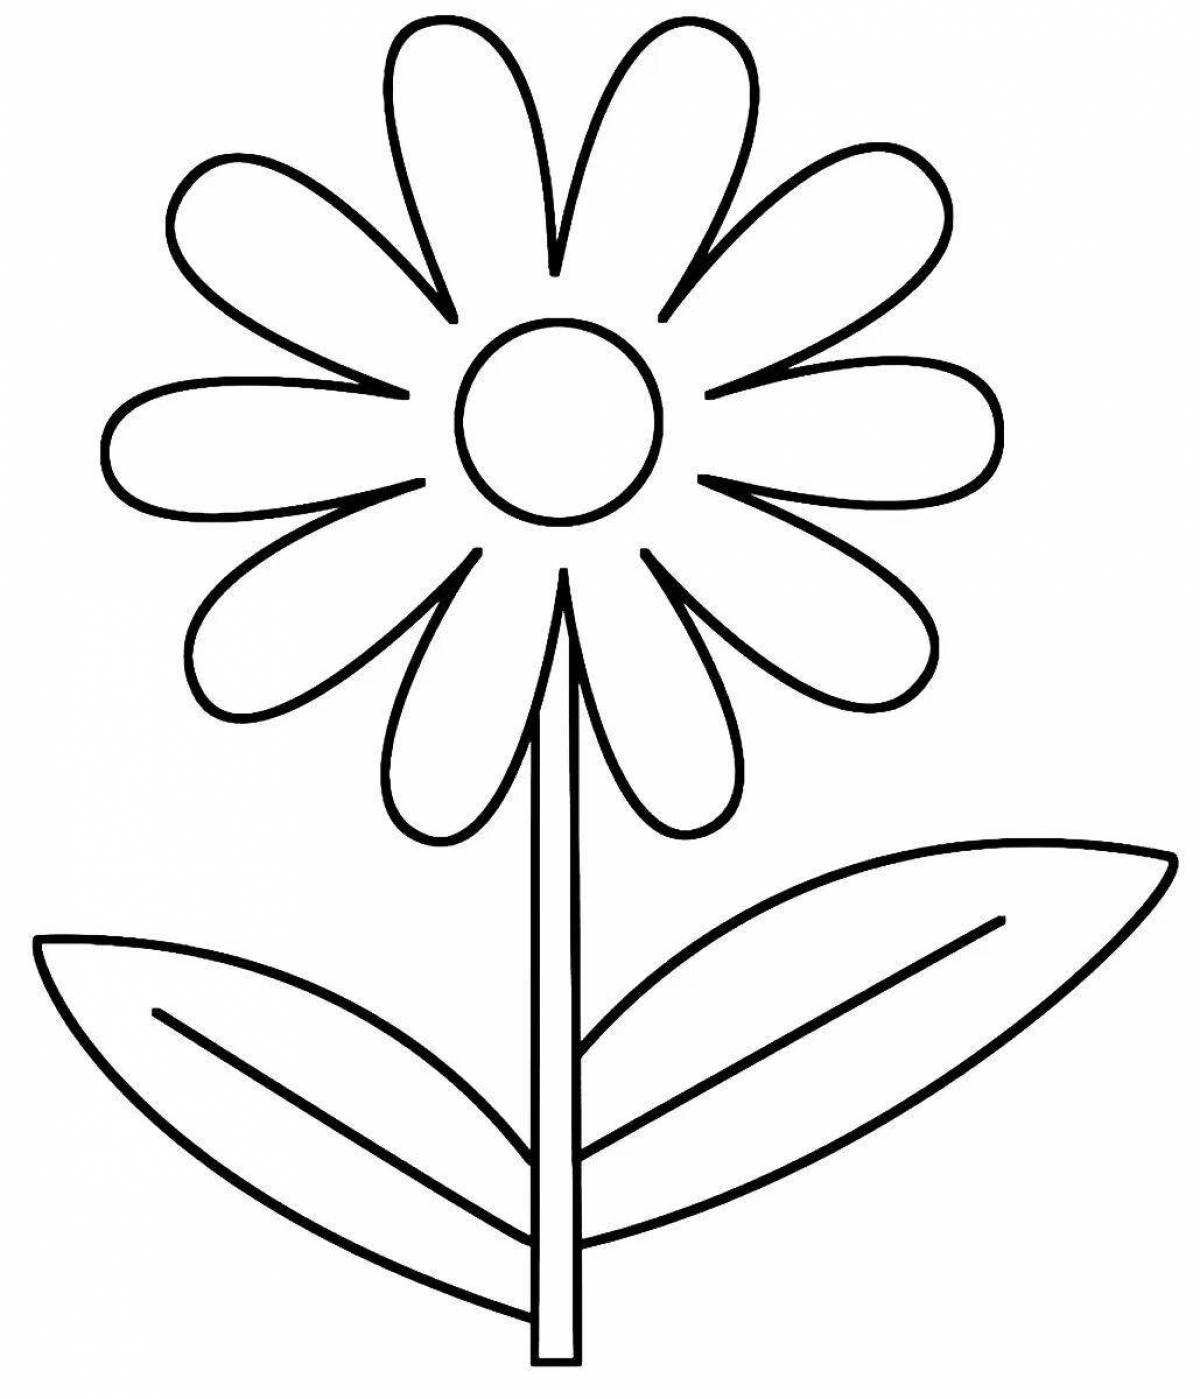 Fun daisy coloring for the little ones